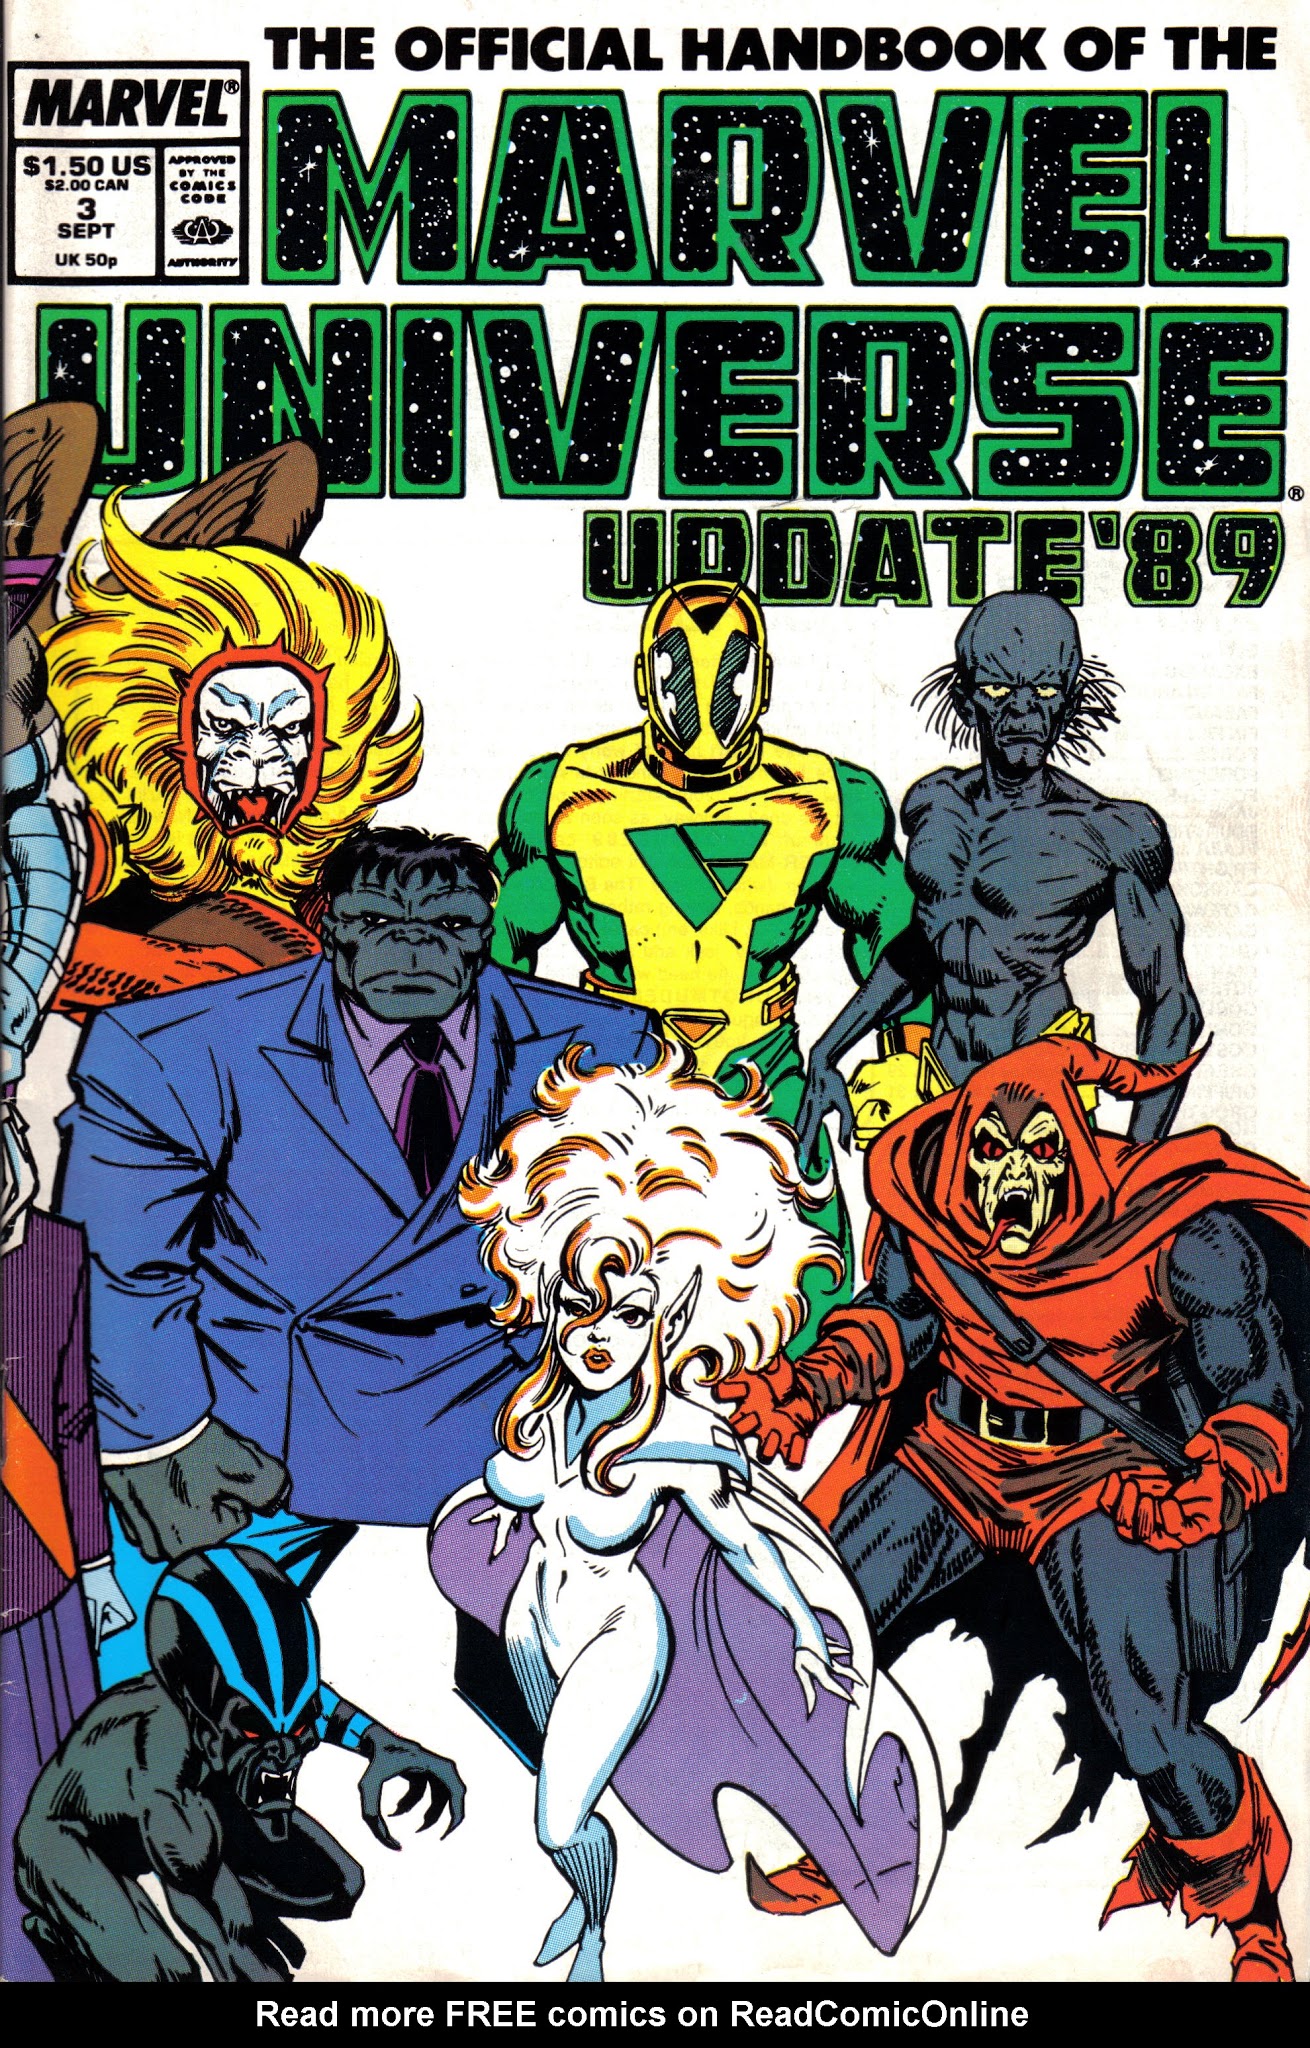 Read online The Official Handbook of the Marvel Universe: Update '89 comic -  Issue #3 - 1